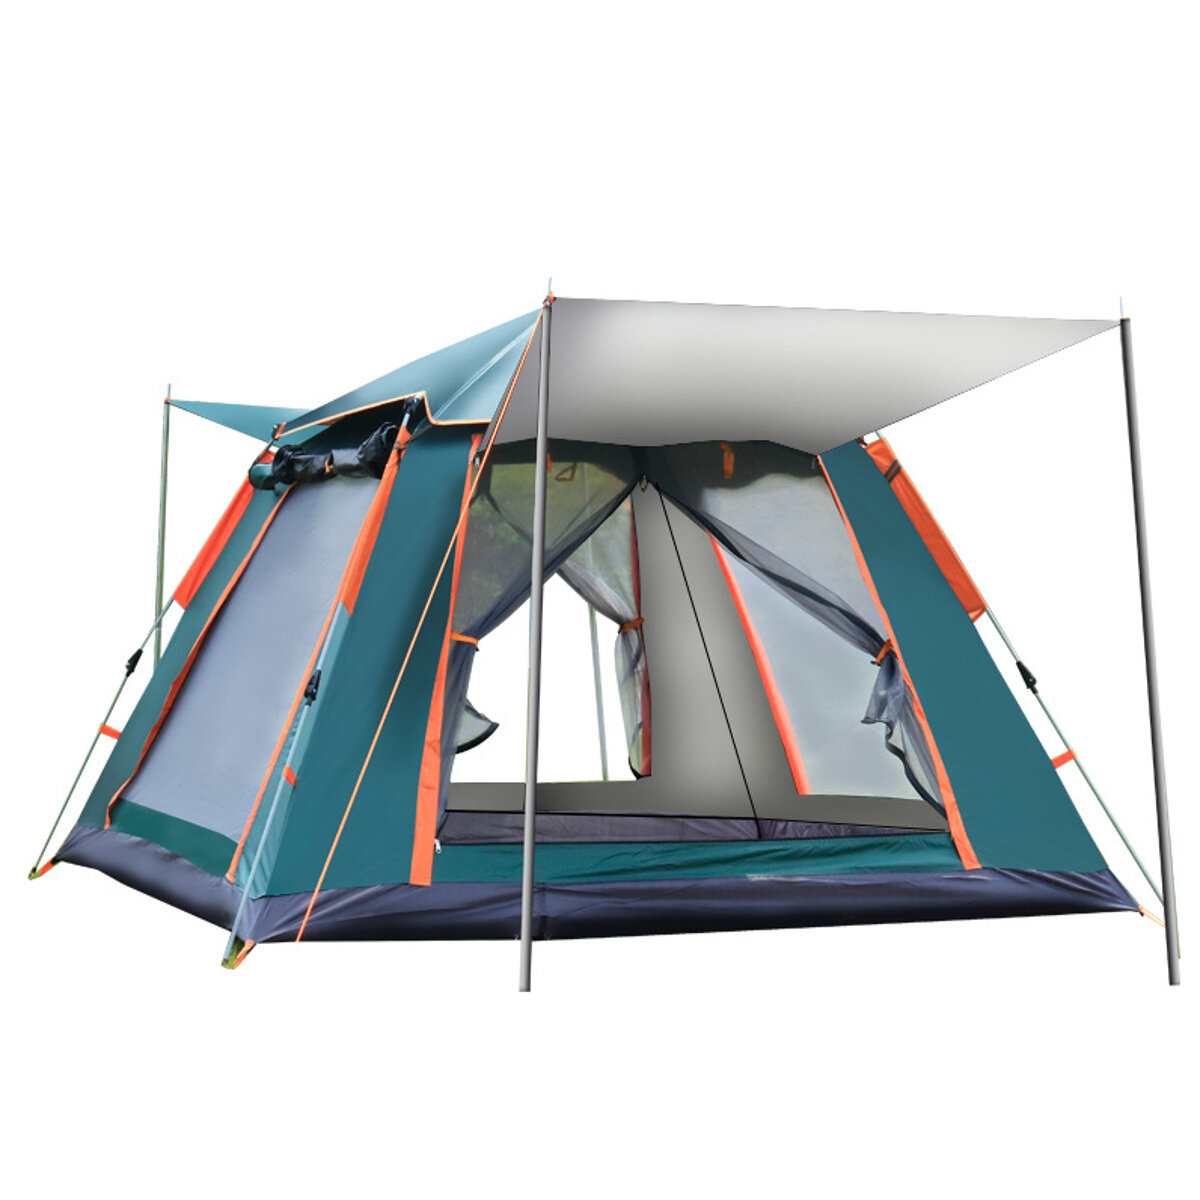 IPRee® 6-7 People Fully Automatic Tent Silver Glue Outdoor Camping Family Picnic Travel Tent